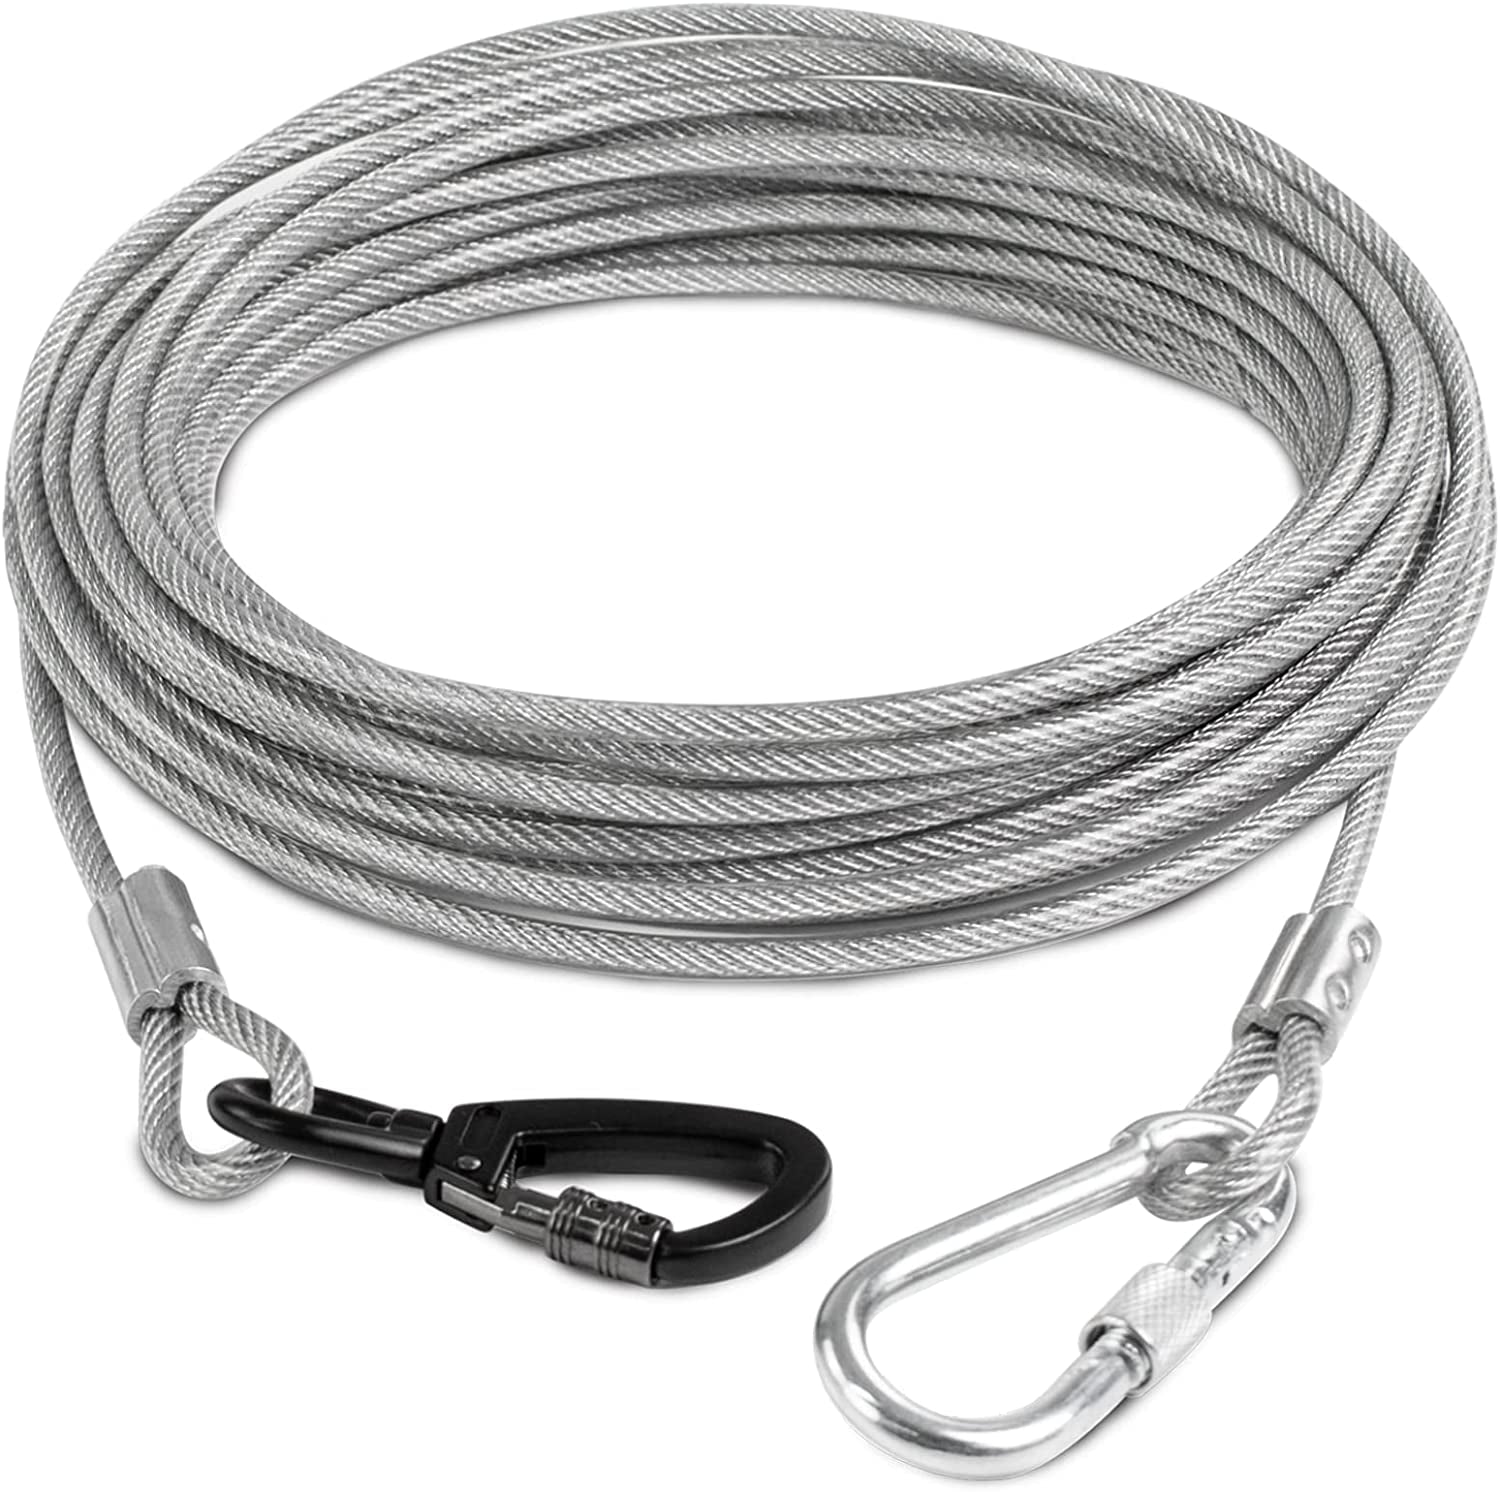 SICZON Dog Tie Out Cable for Pooches Runner up to 250 Lbs, 10FT